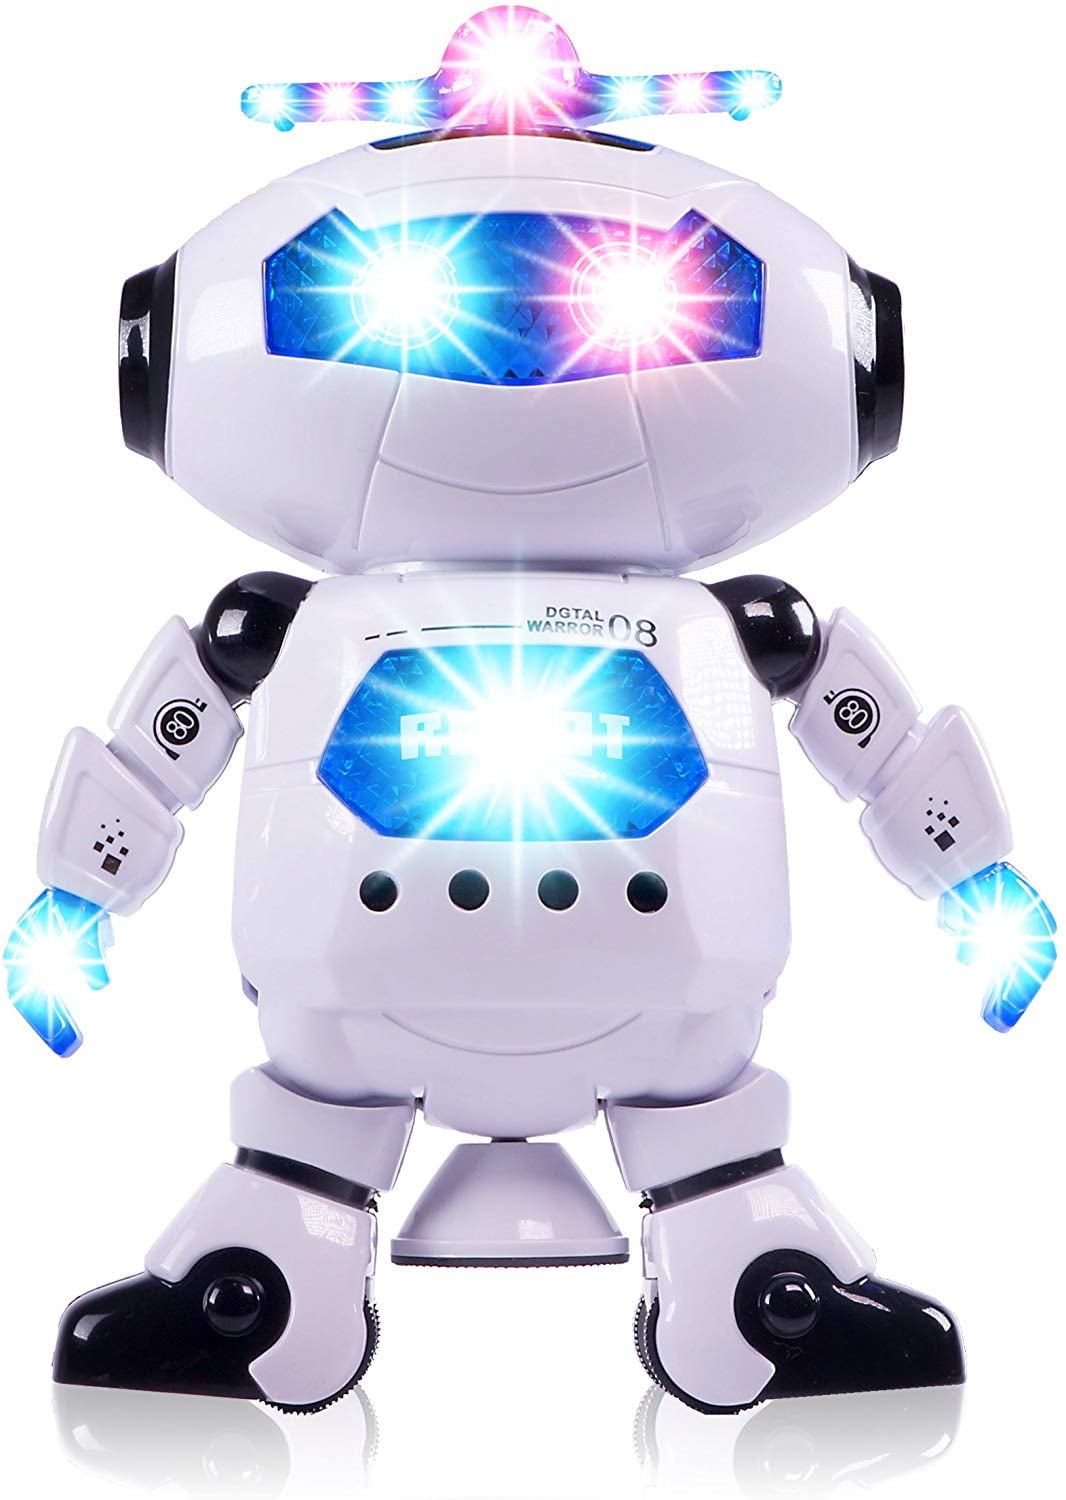 Toys Fit for Boys Robot Kids Toddler Dance Music Flash Light Toy Cool Xmas Gift 